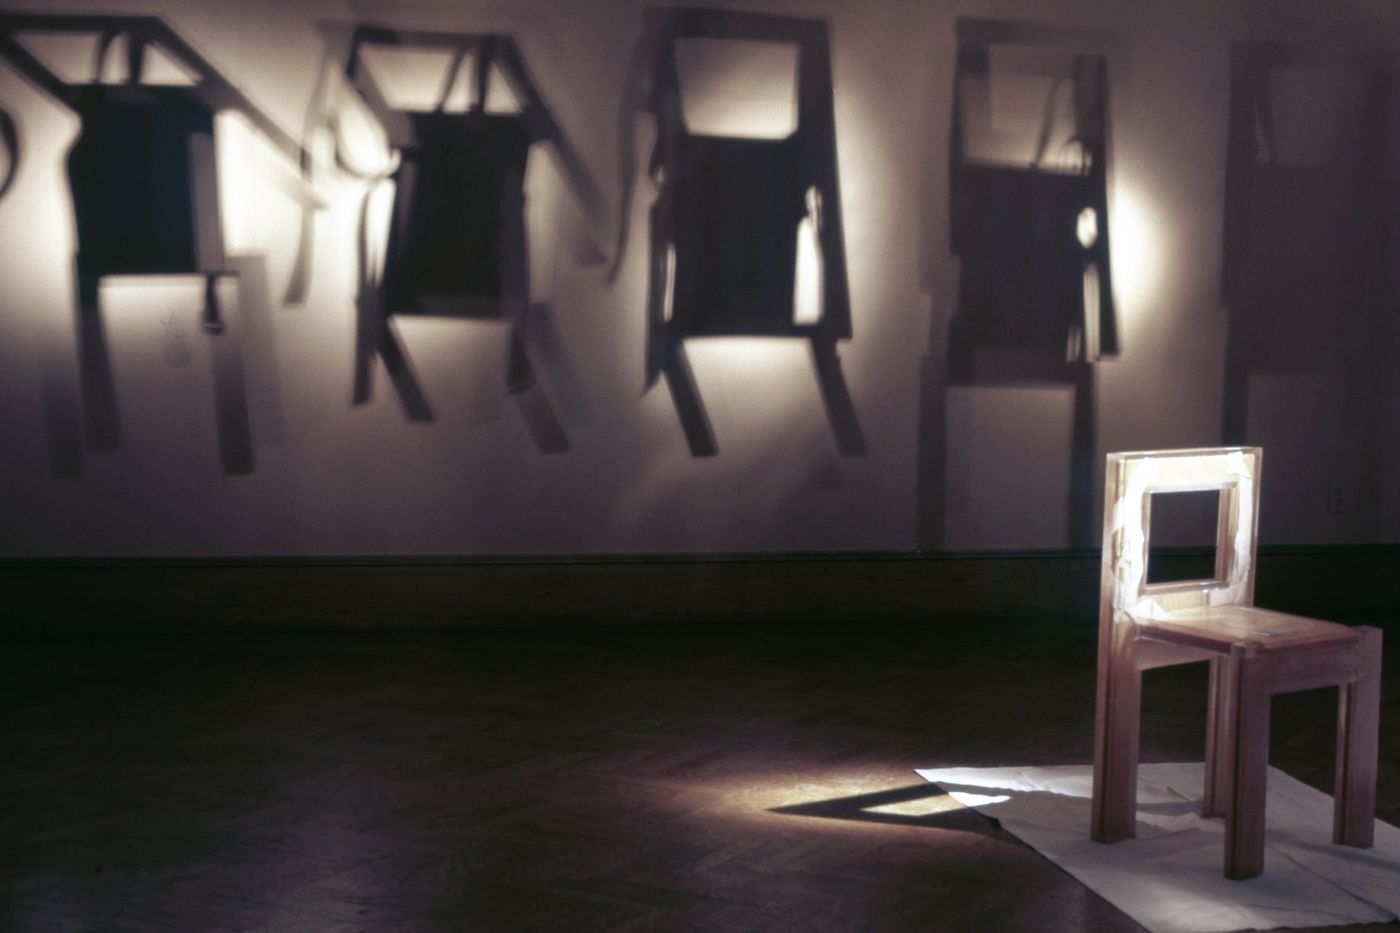 Photograph of an installation of the chairs for Vestirsi Di Siede